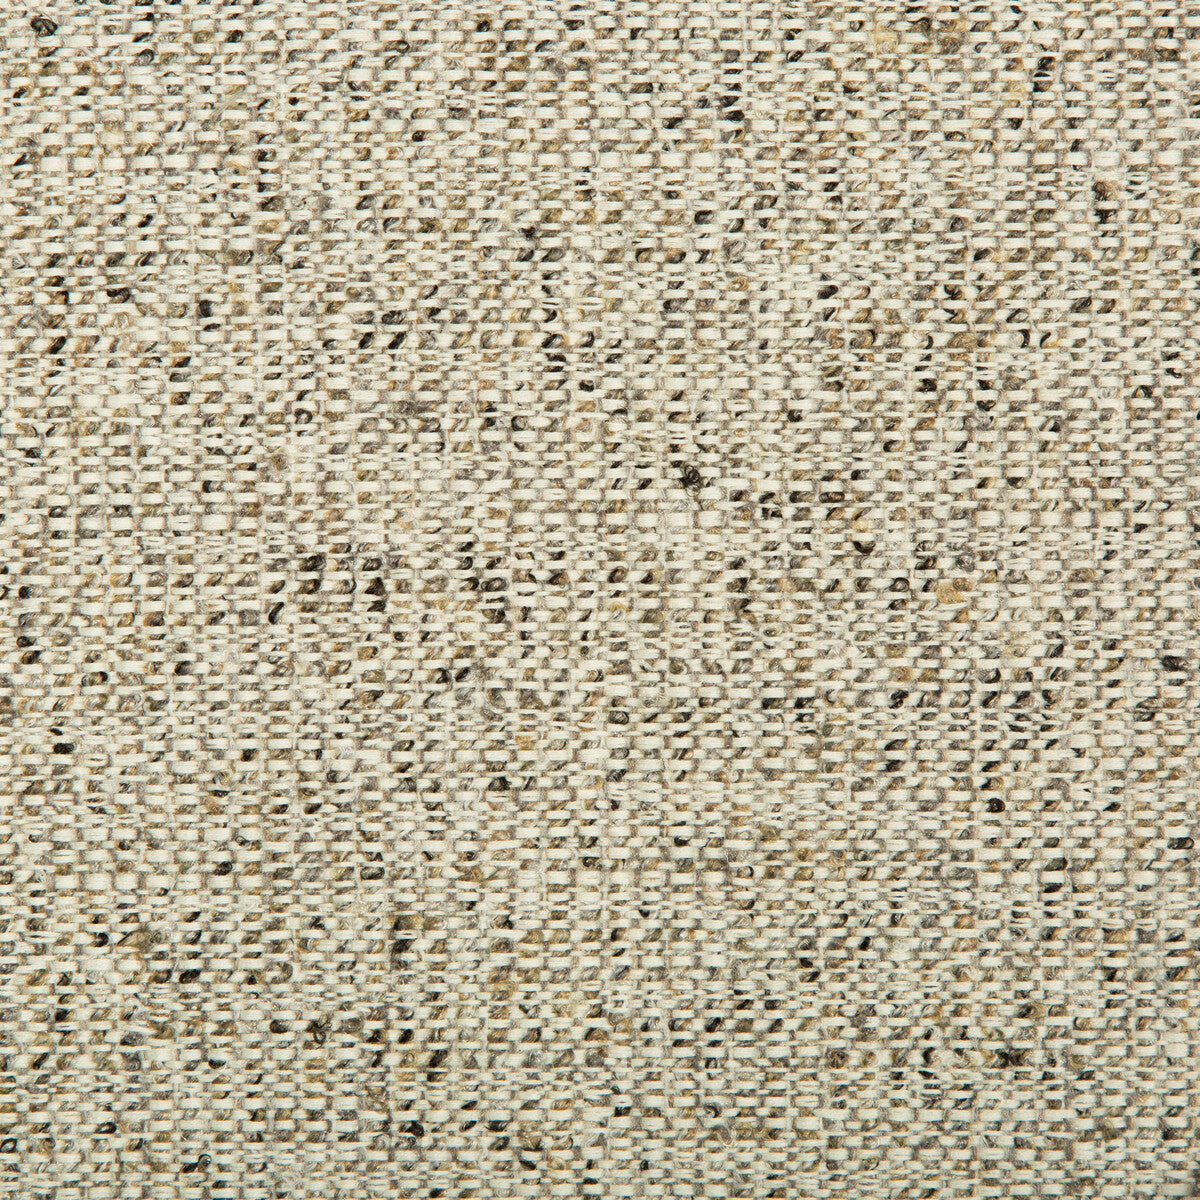 Kravet Contract fabric in 34635-1611 color - pattern 34635.1611.0 - by Kravet Contract in the Crypton Incase collection